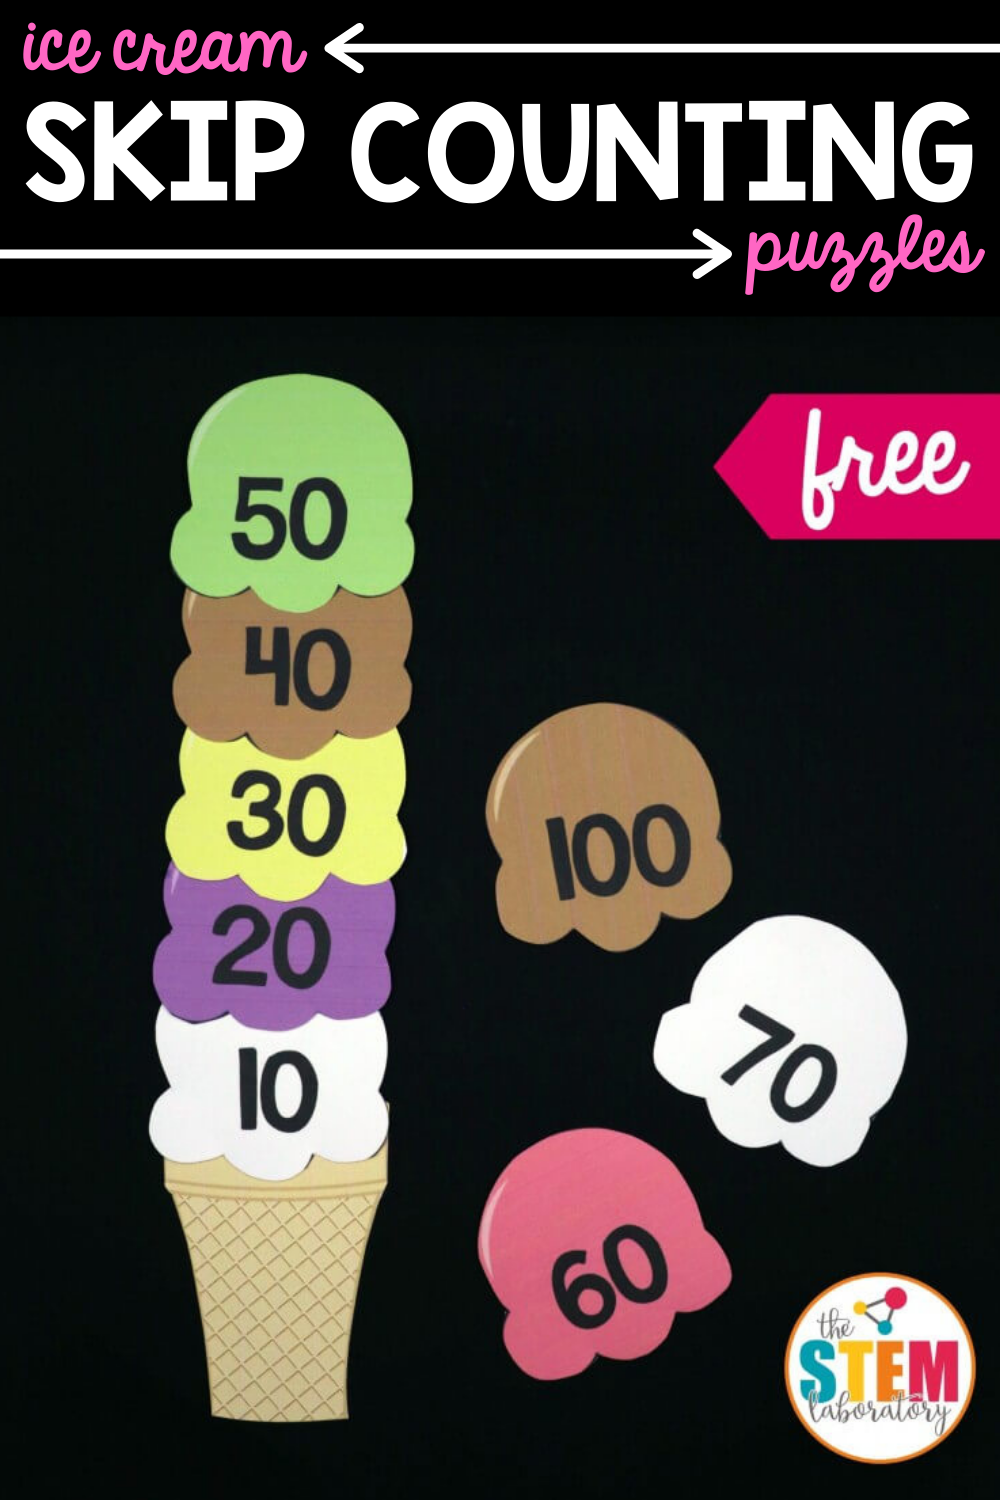 Printable Ice Cream Skip-Counting Match Puzzles